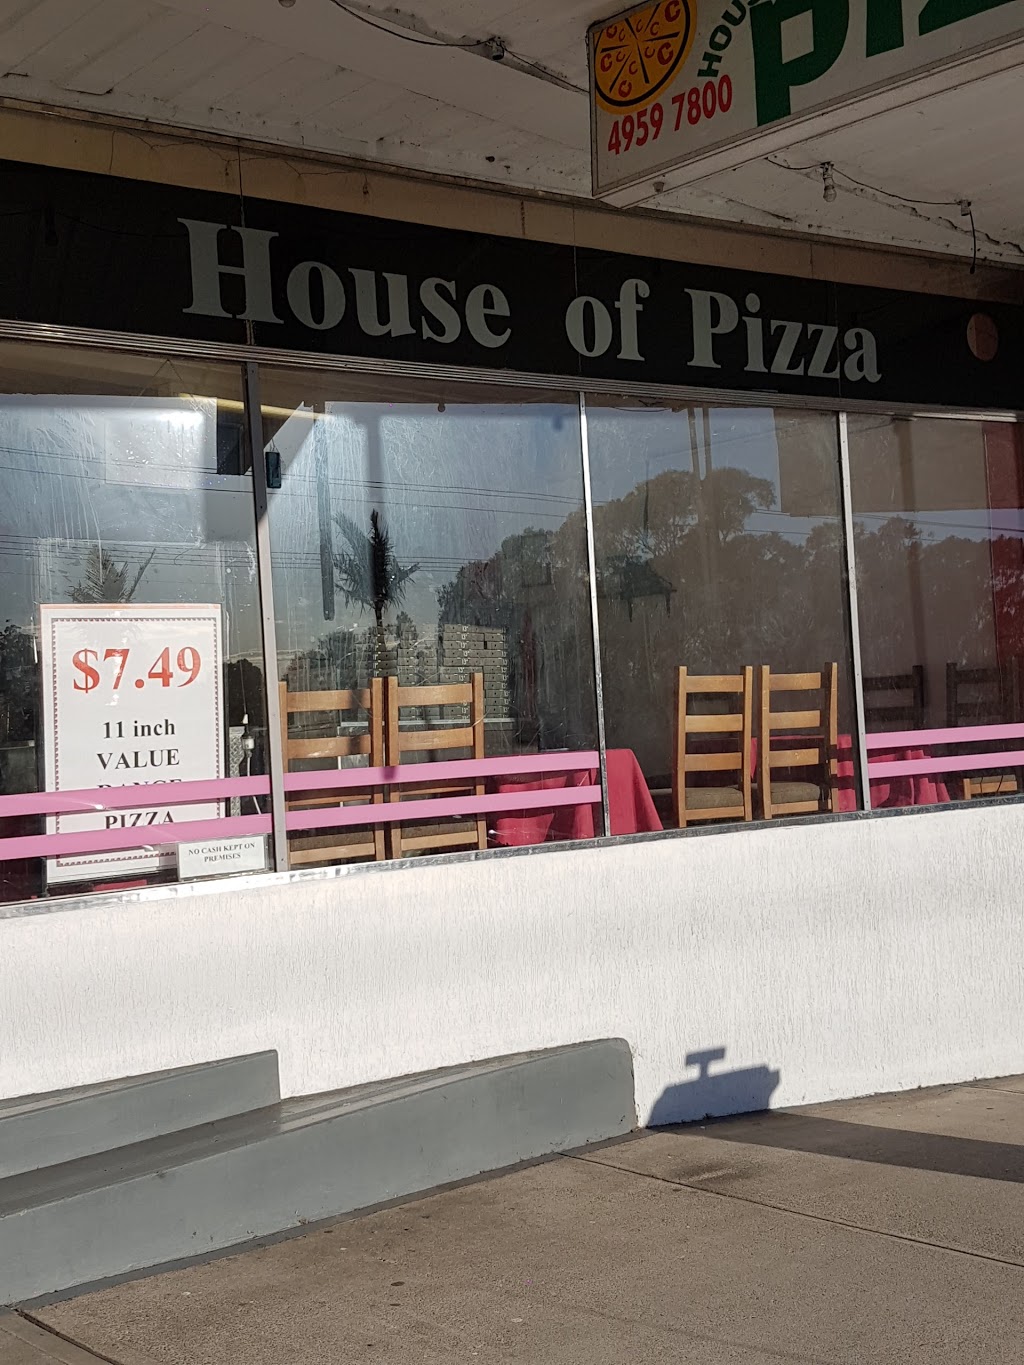 House of Pizza | 274 Main Rd, Fennell Bay NSW 2283, Australia | Phone: (02) 4959 7800